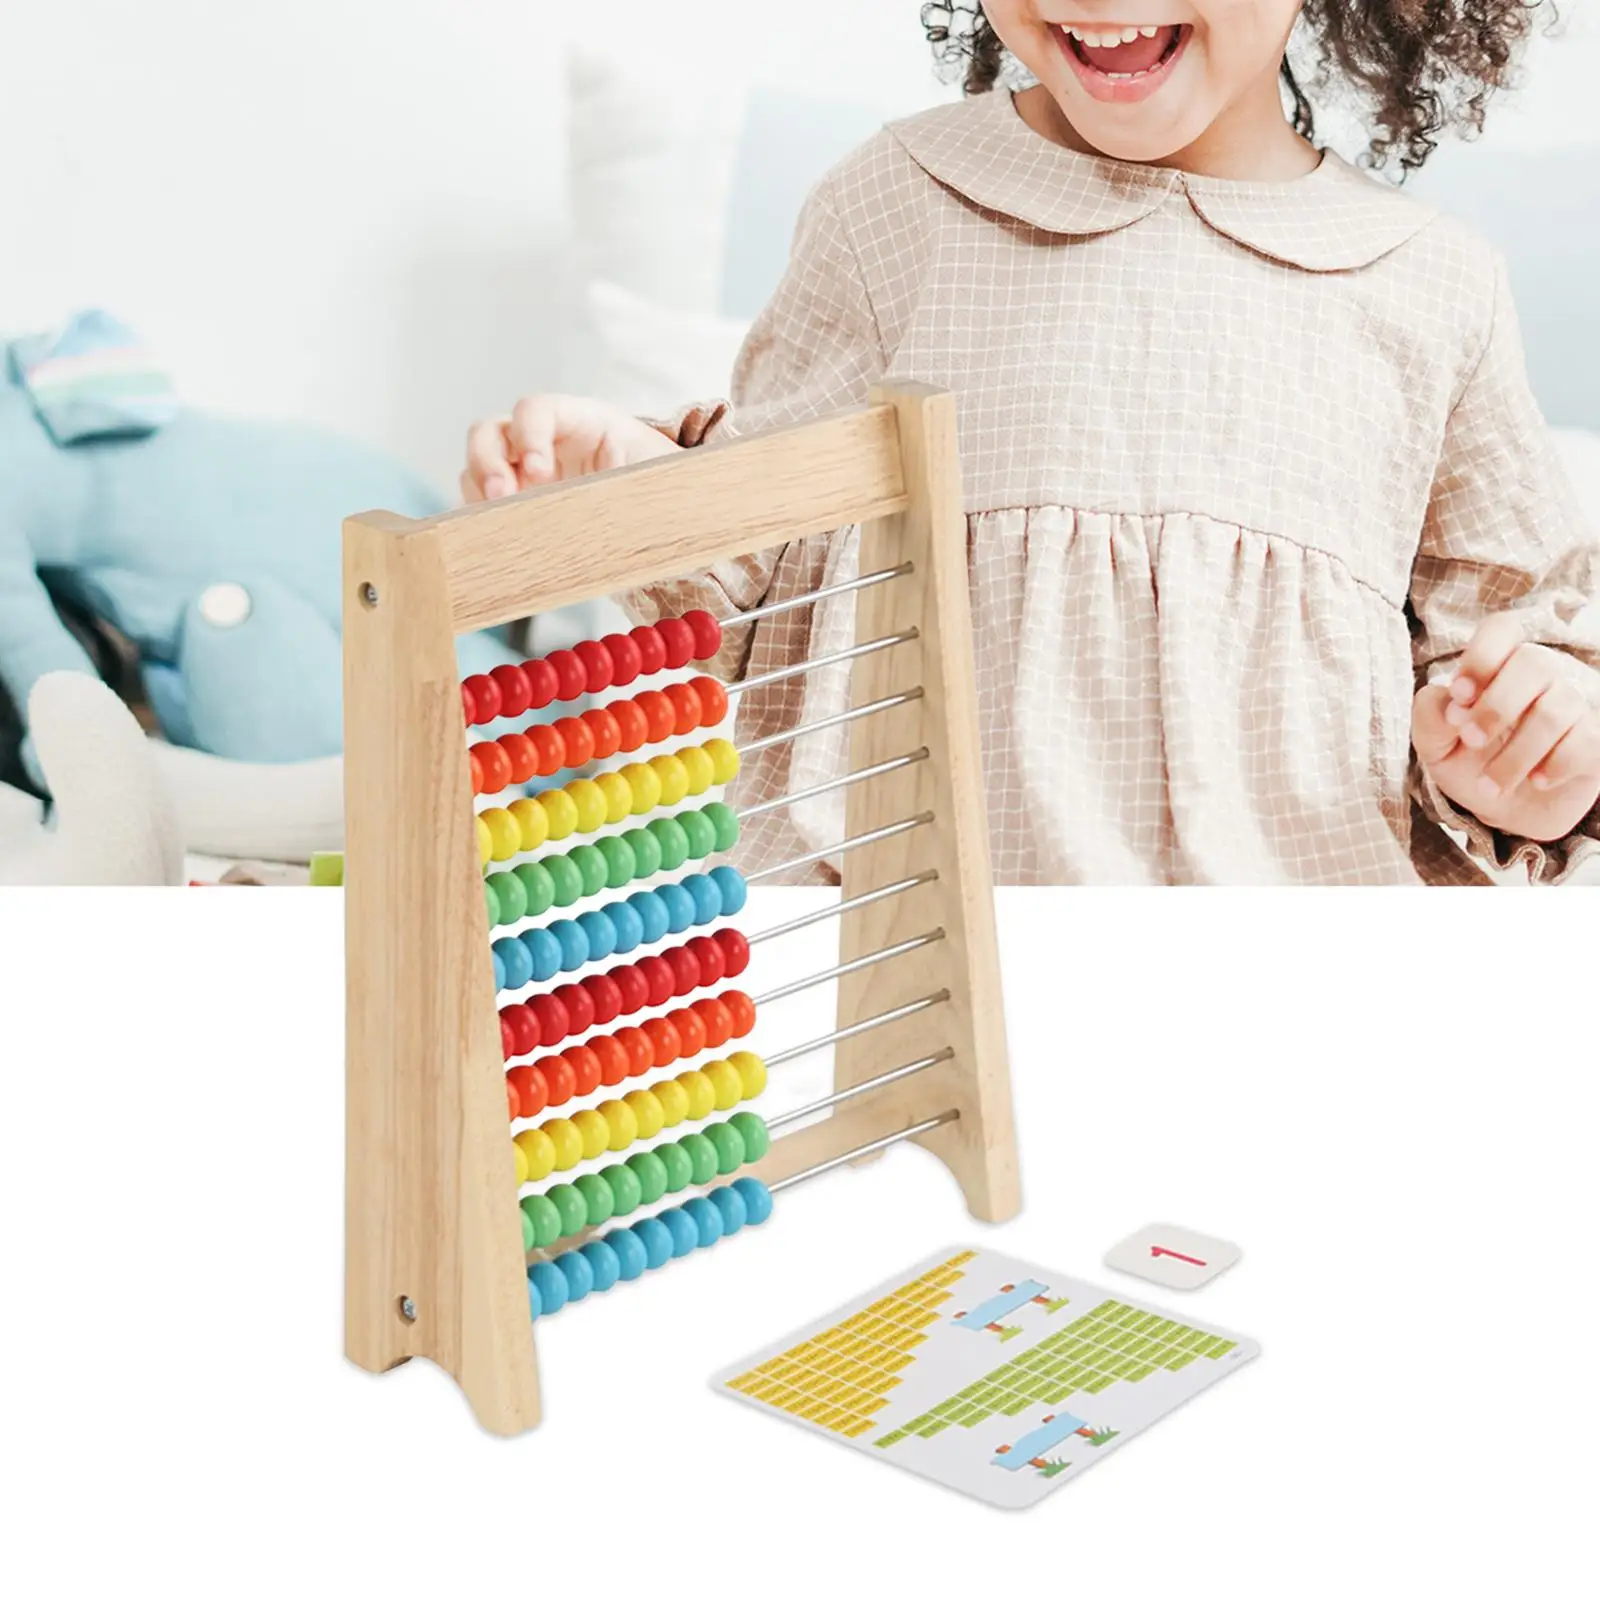 Wooden Abacus Toy with 100 Beads Early Childhood Education Educational Counting Toy for Children Boys Girls Toddlers Elementary